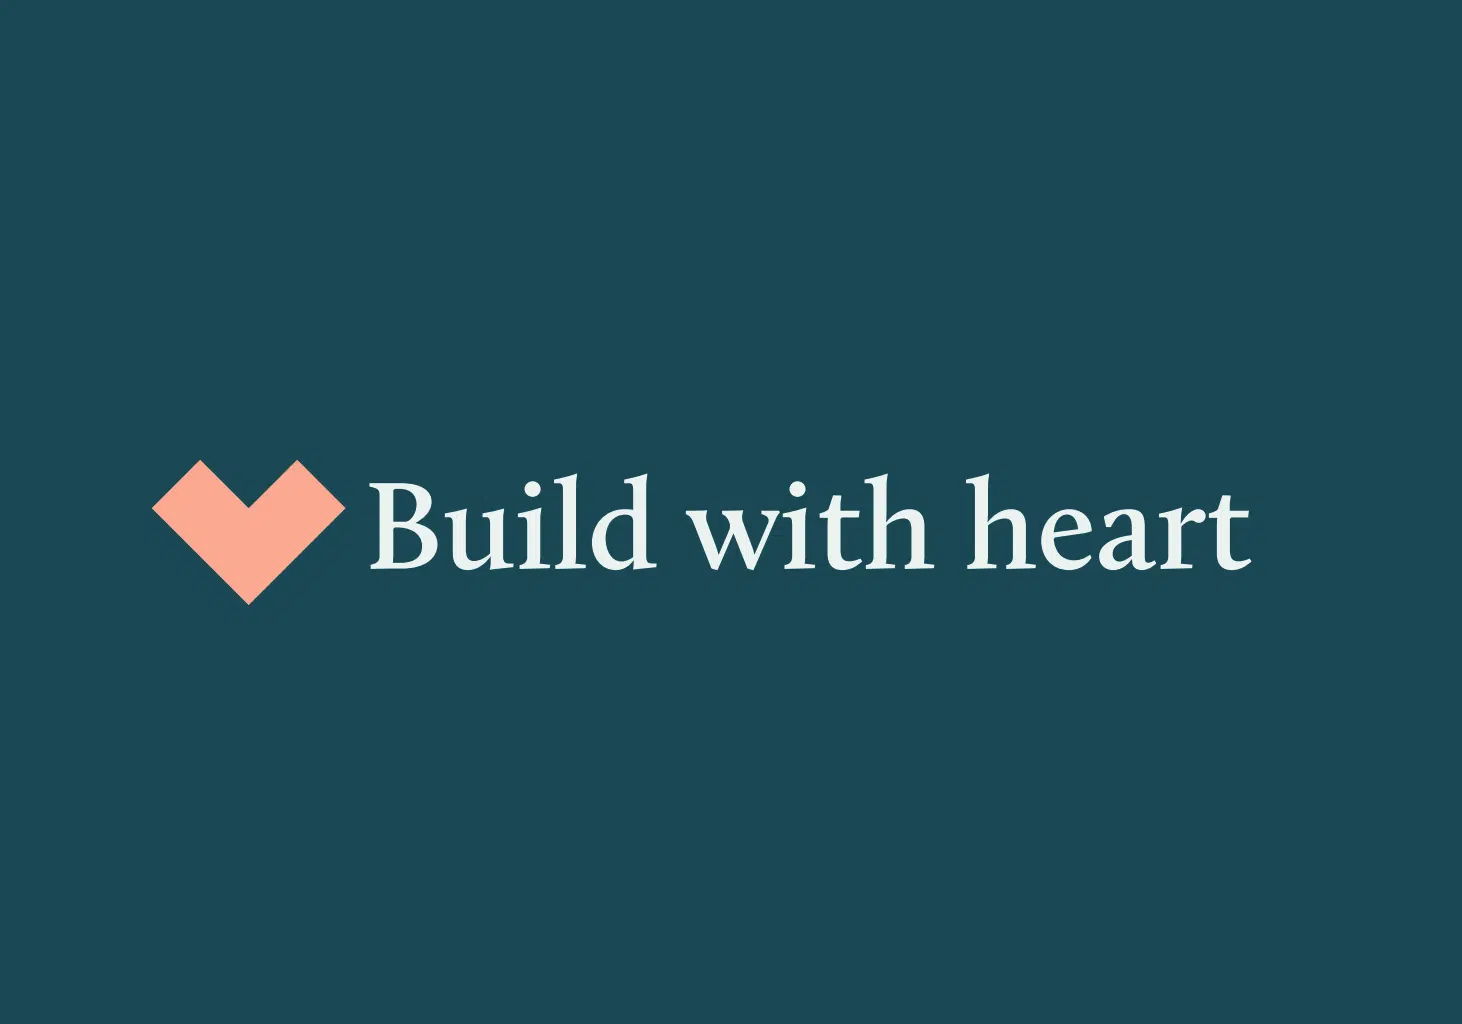 Codeable - Build with heart